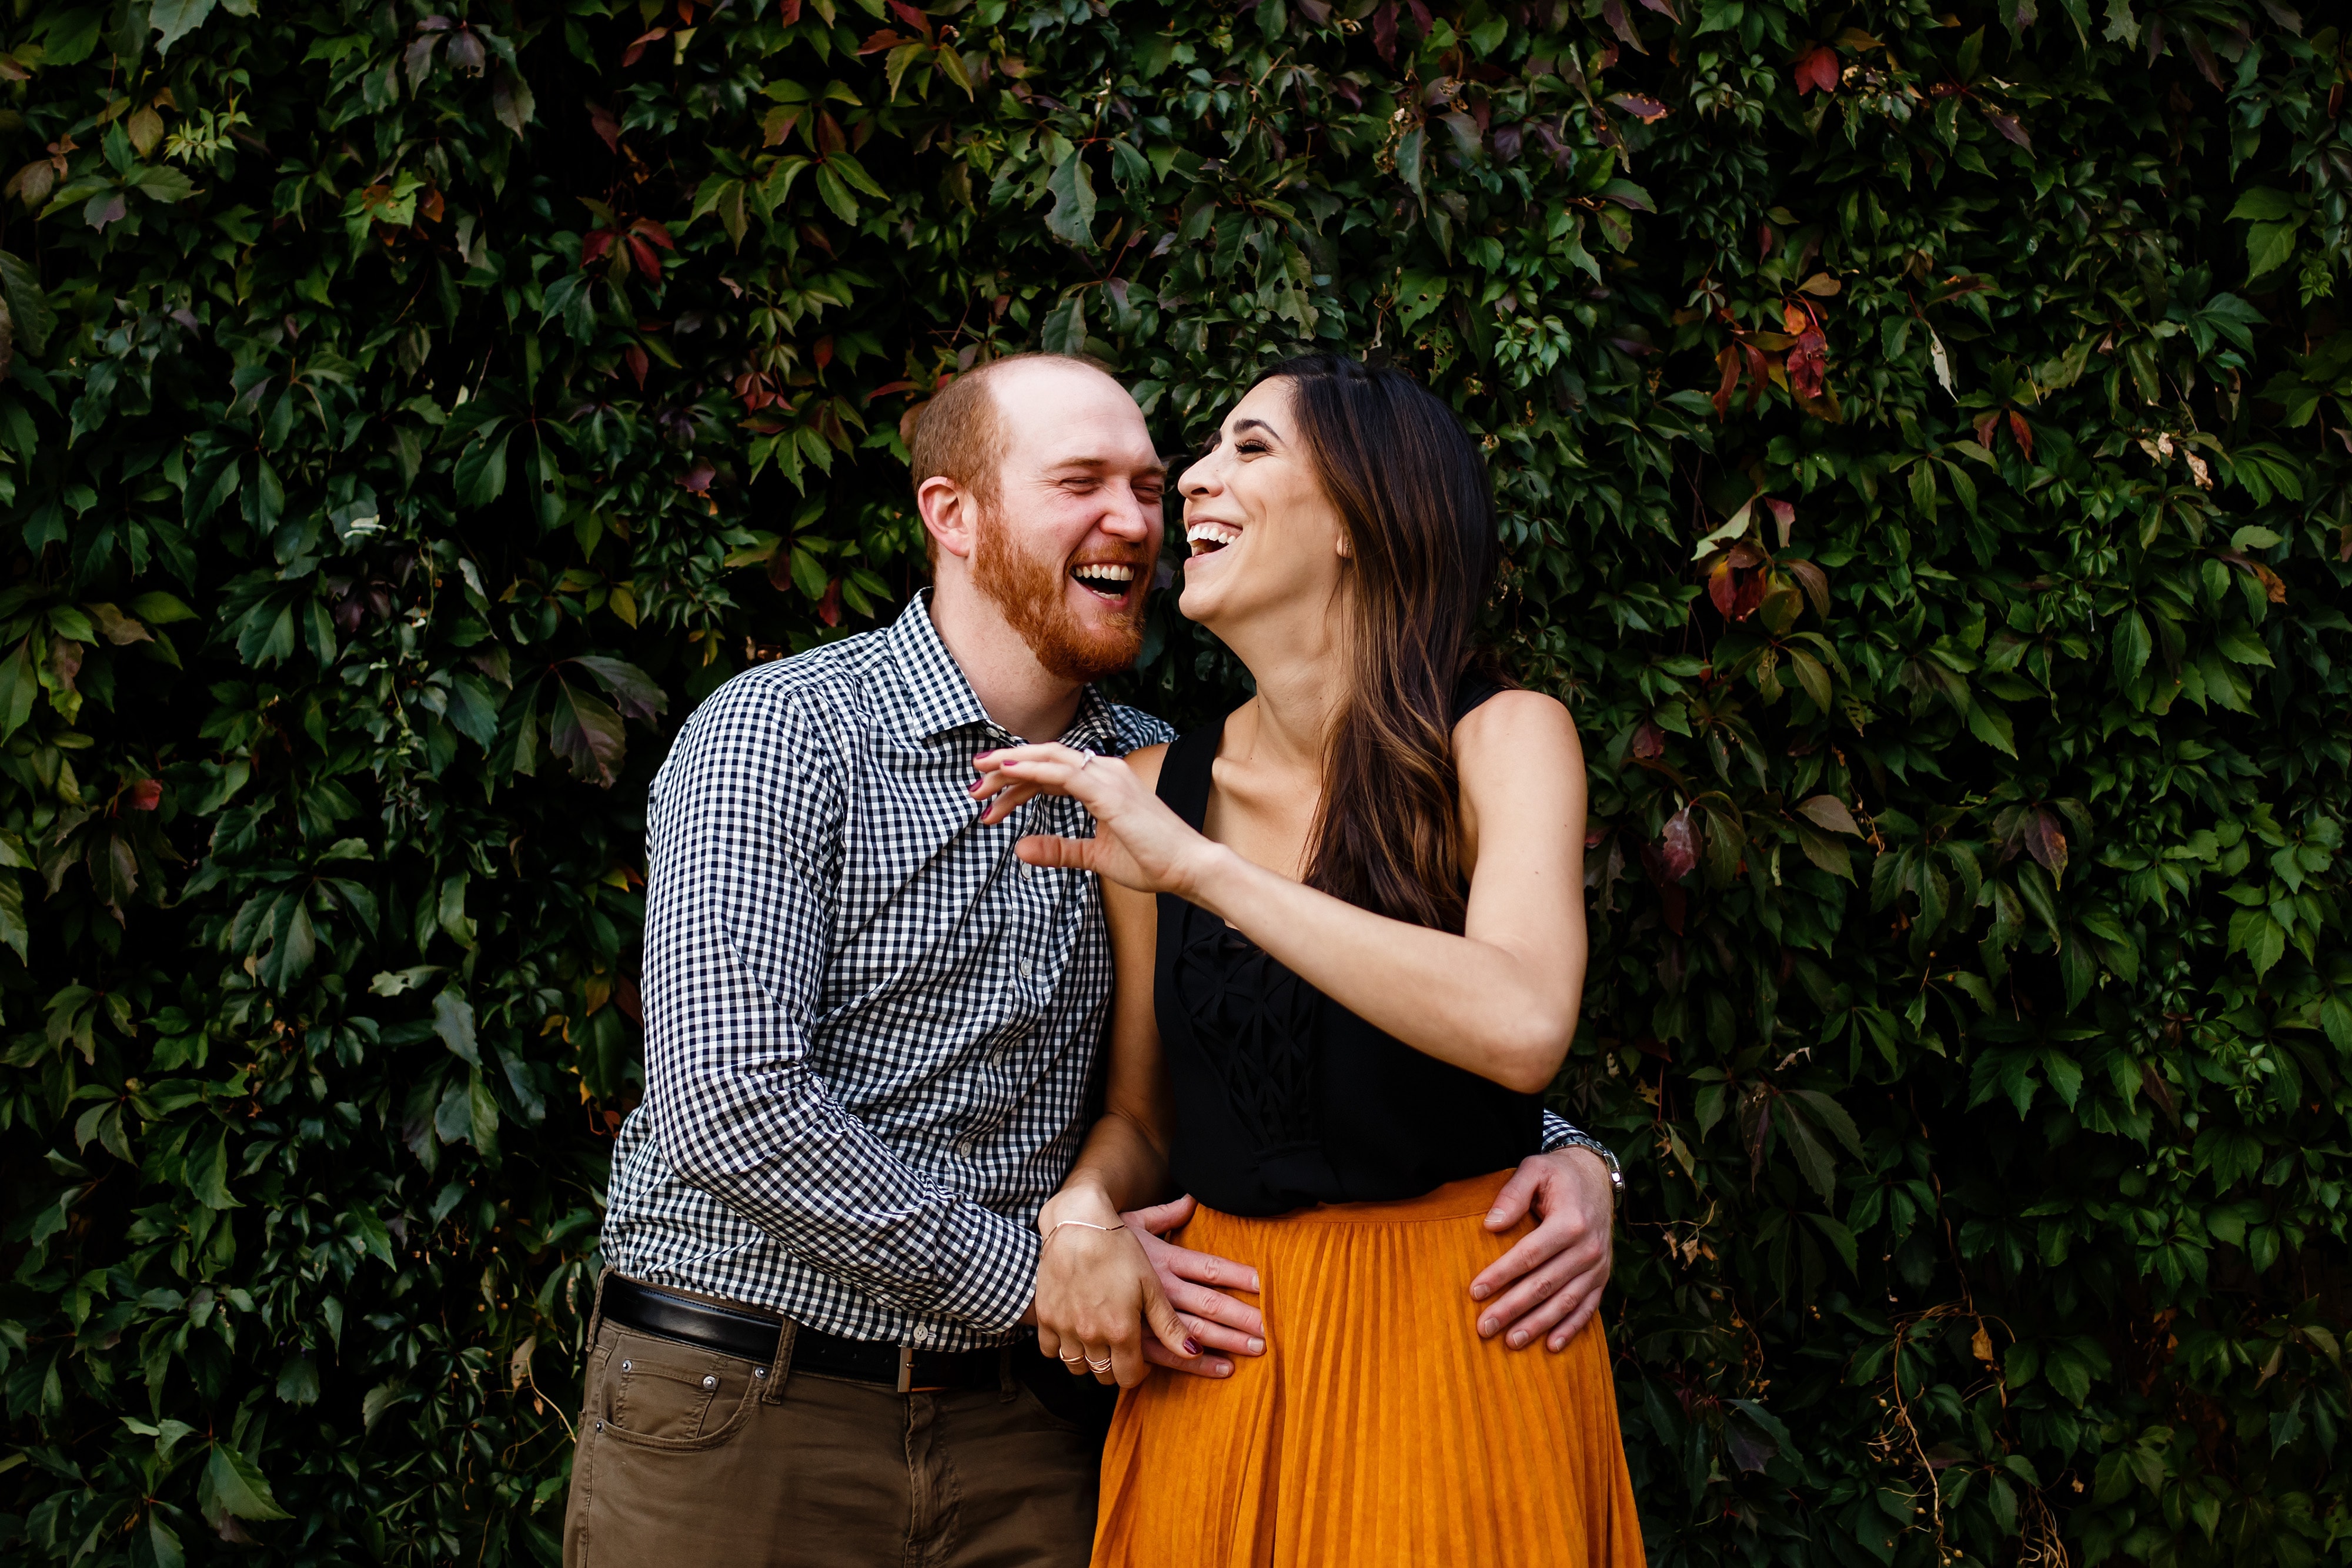 Chris and Angie share a laugh together in front of the ivy wall along the Cherry Creek path in Lower Downtown during their engagement session